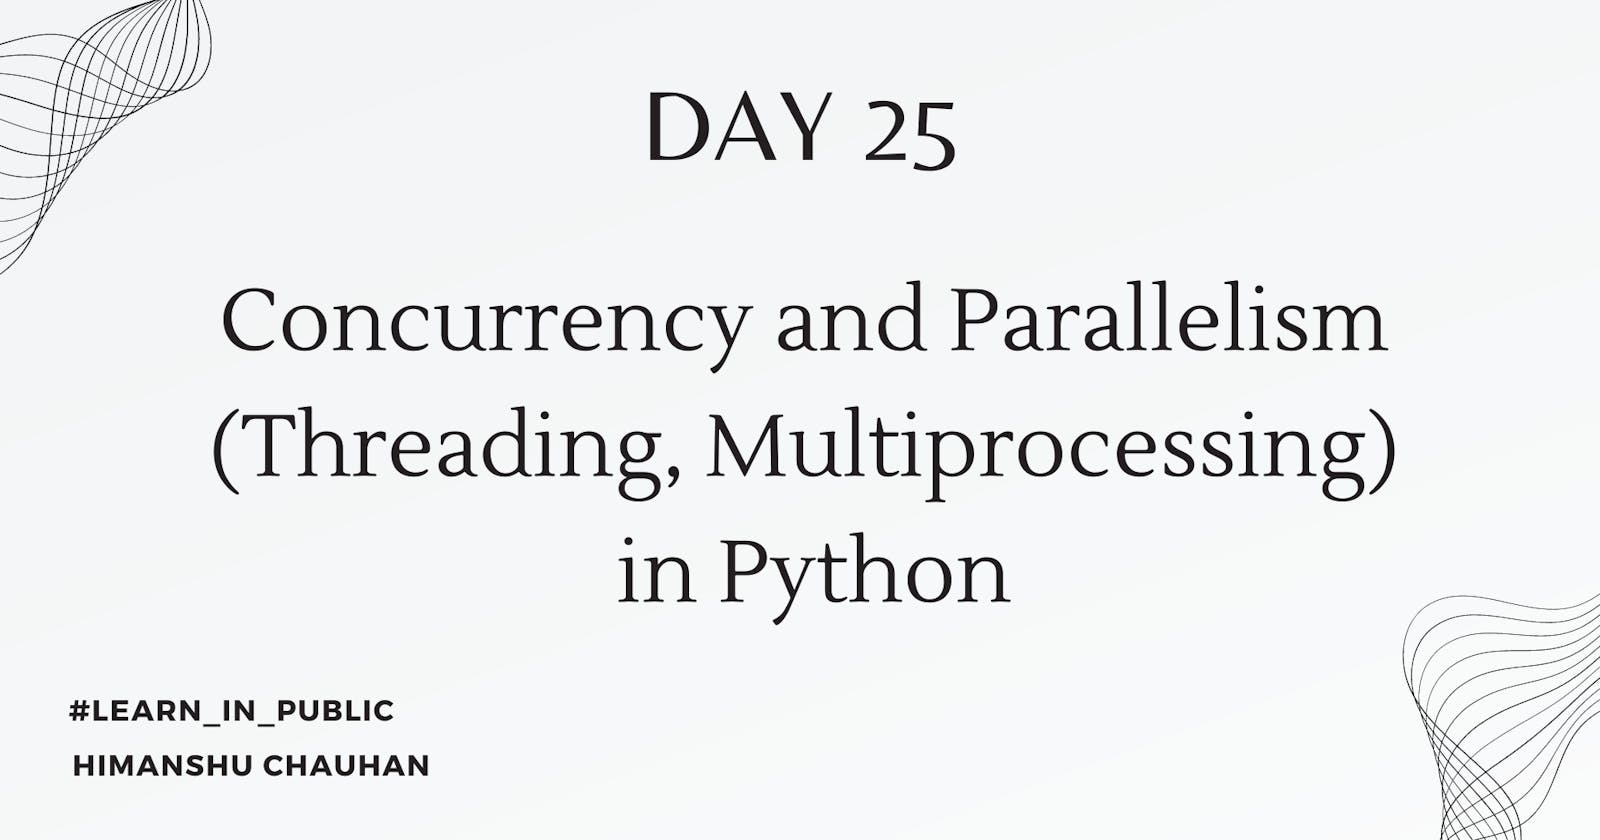 Day 25: Concurrency and Parallelism (Threading, Multiprocessing) with practical